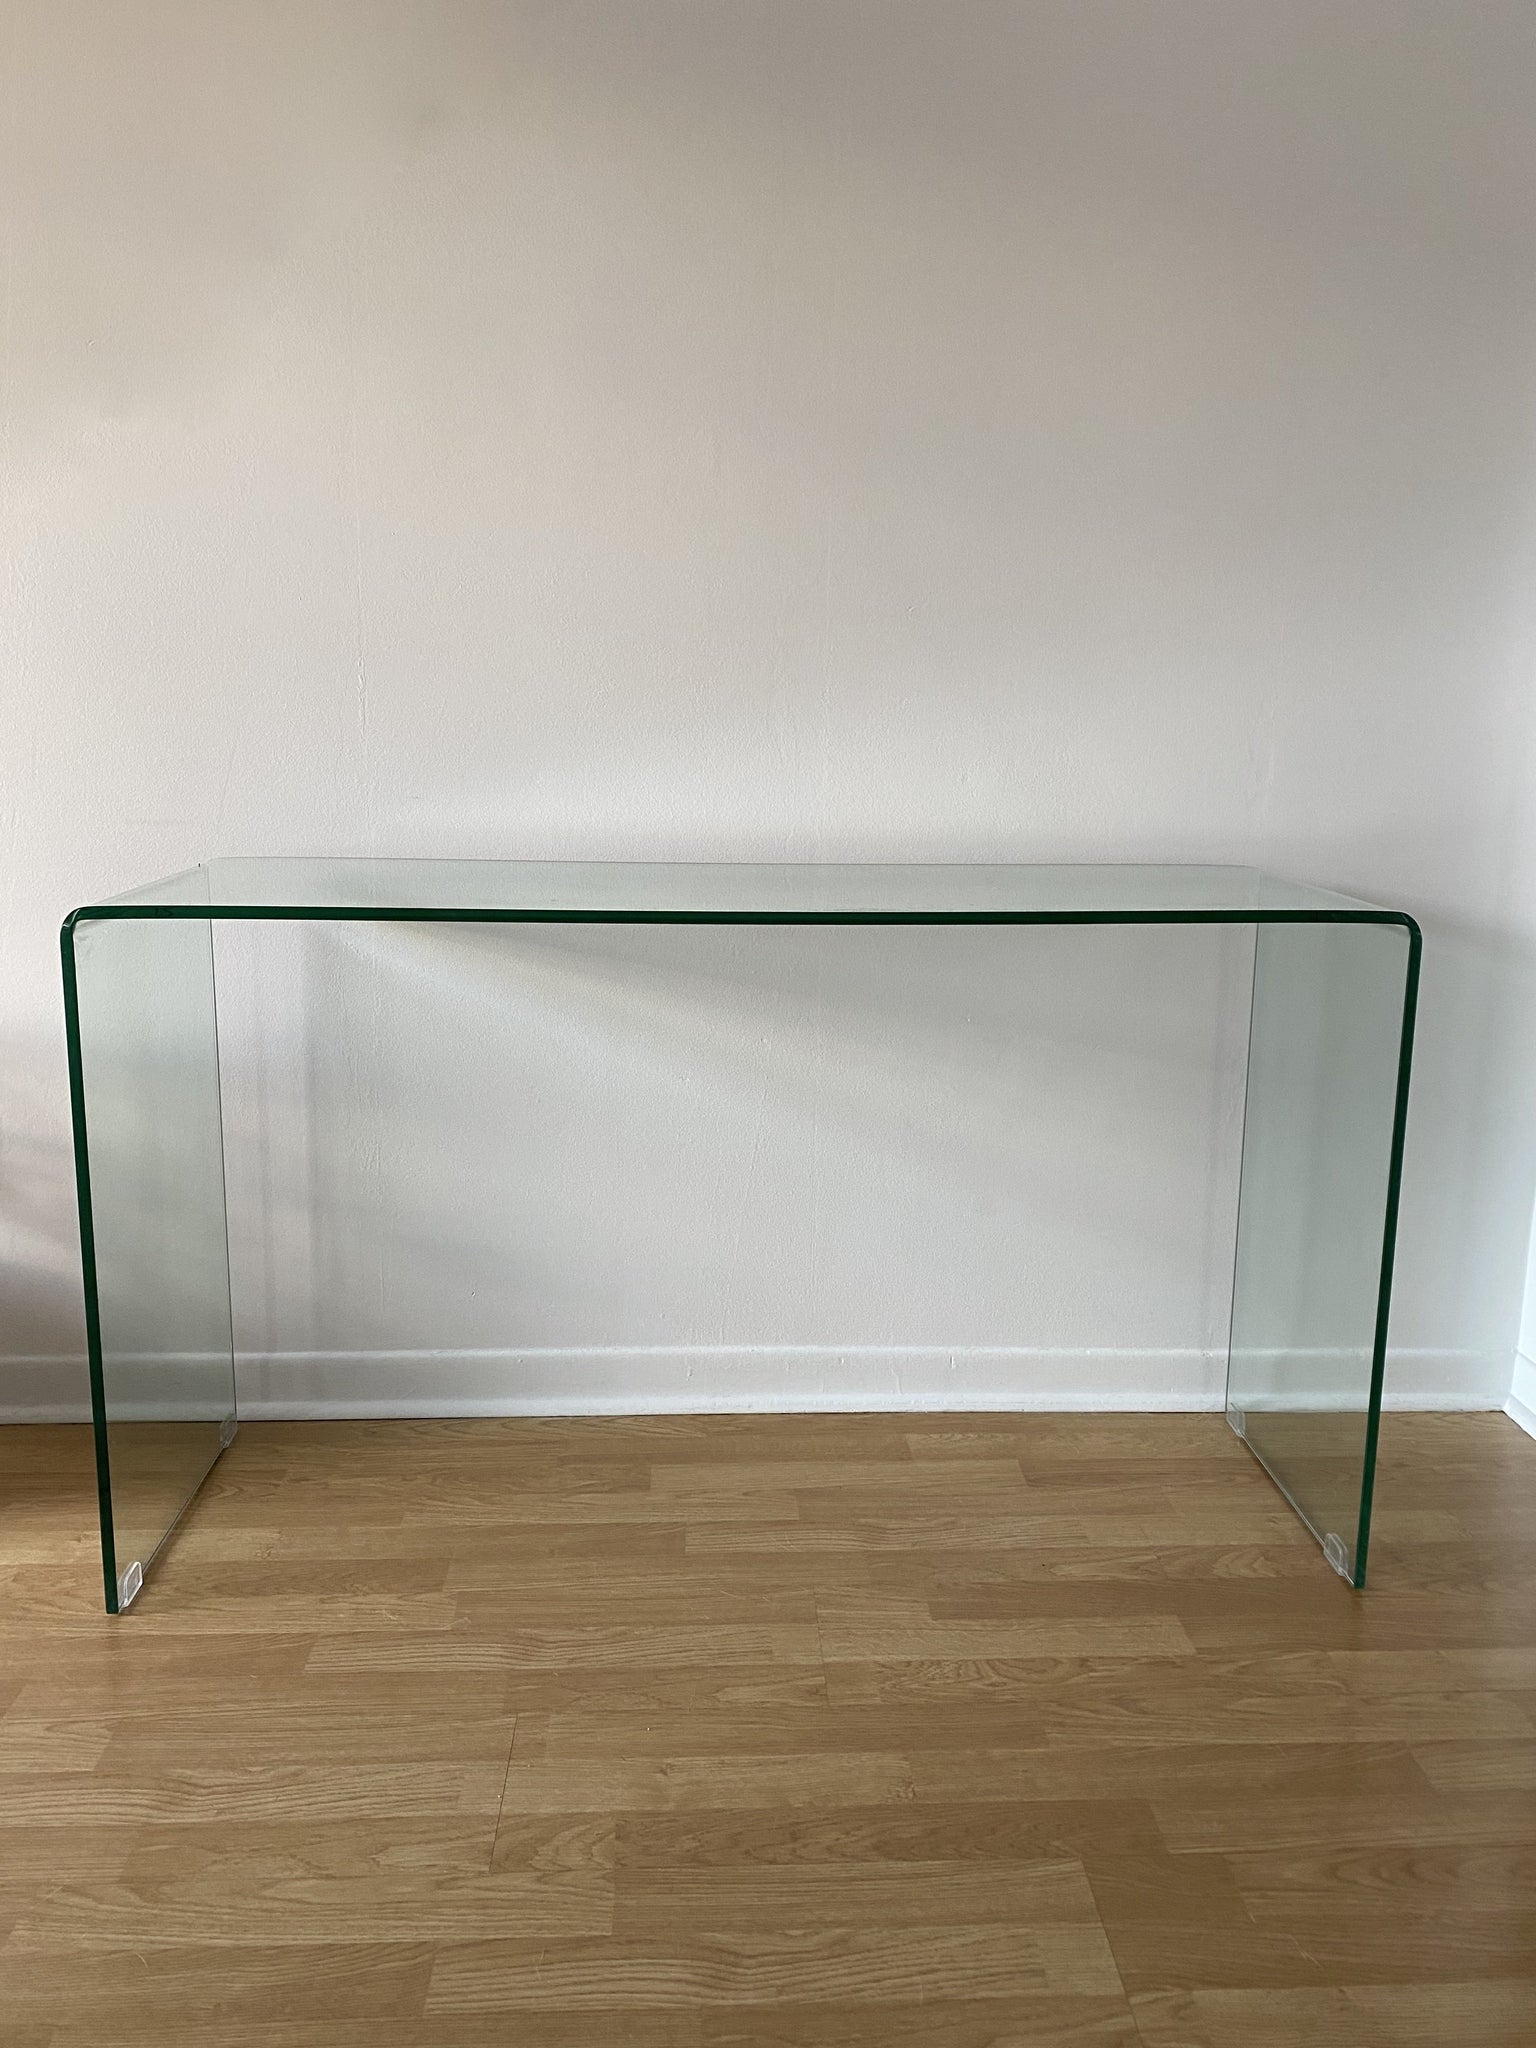 Stunning tempered glass waterfall console table